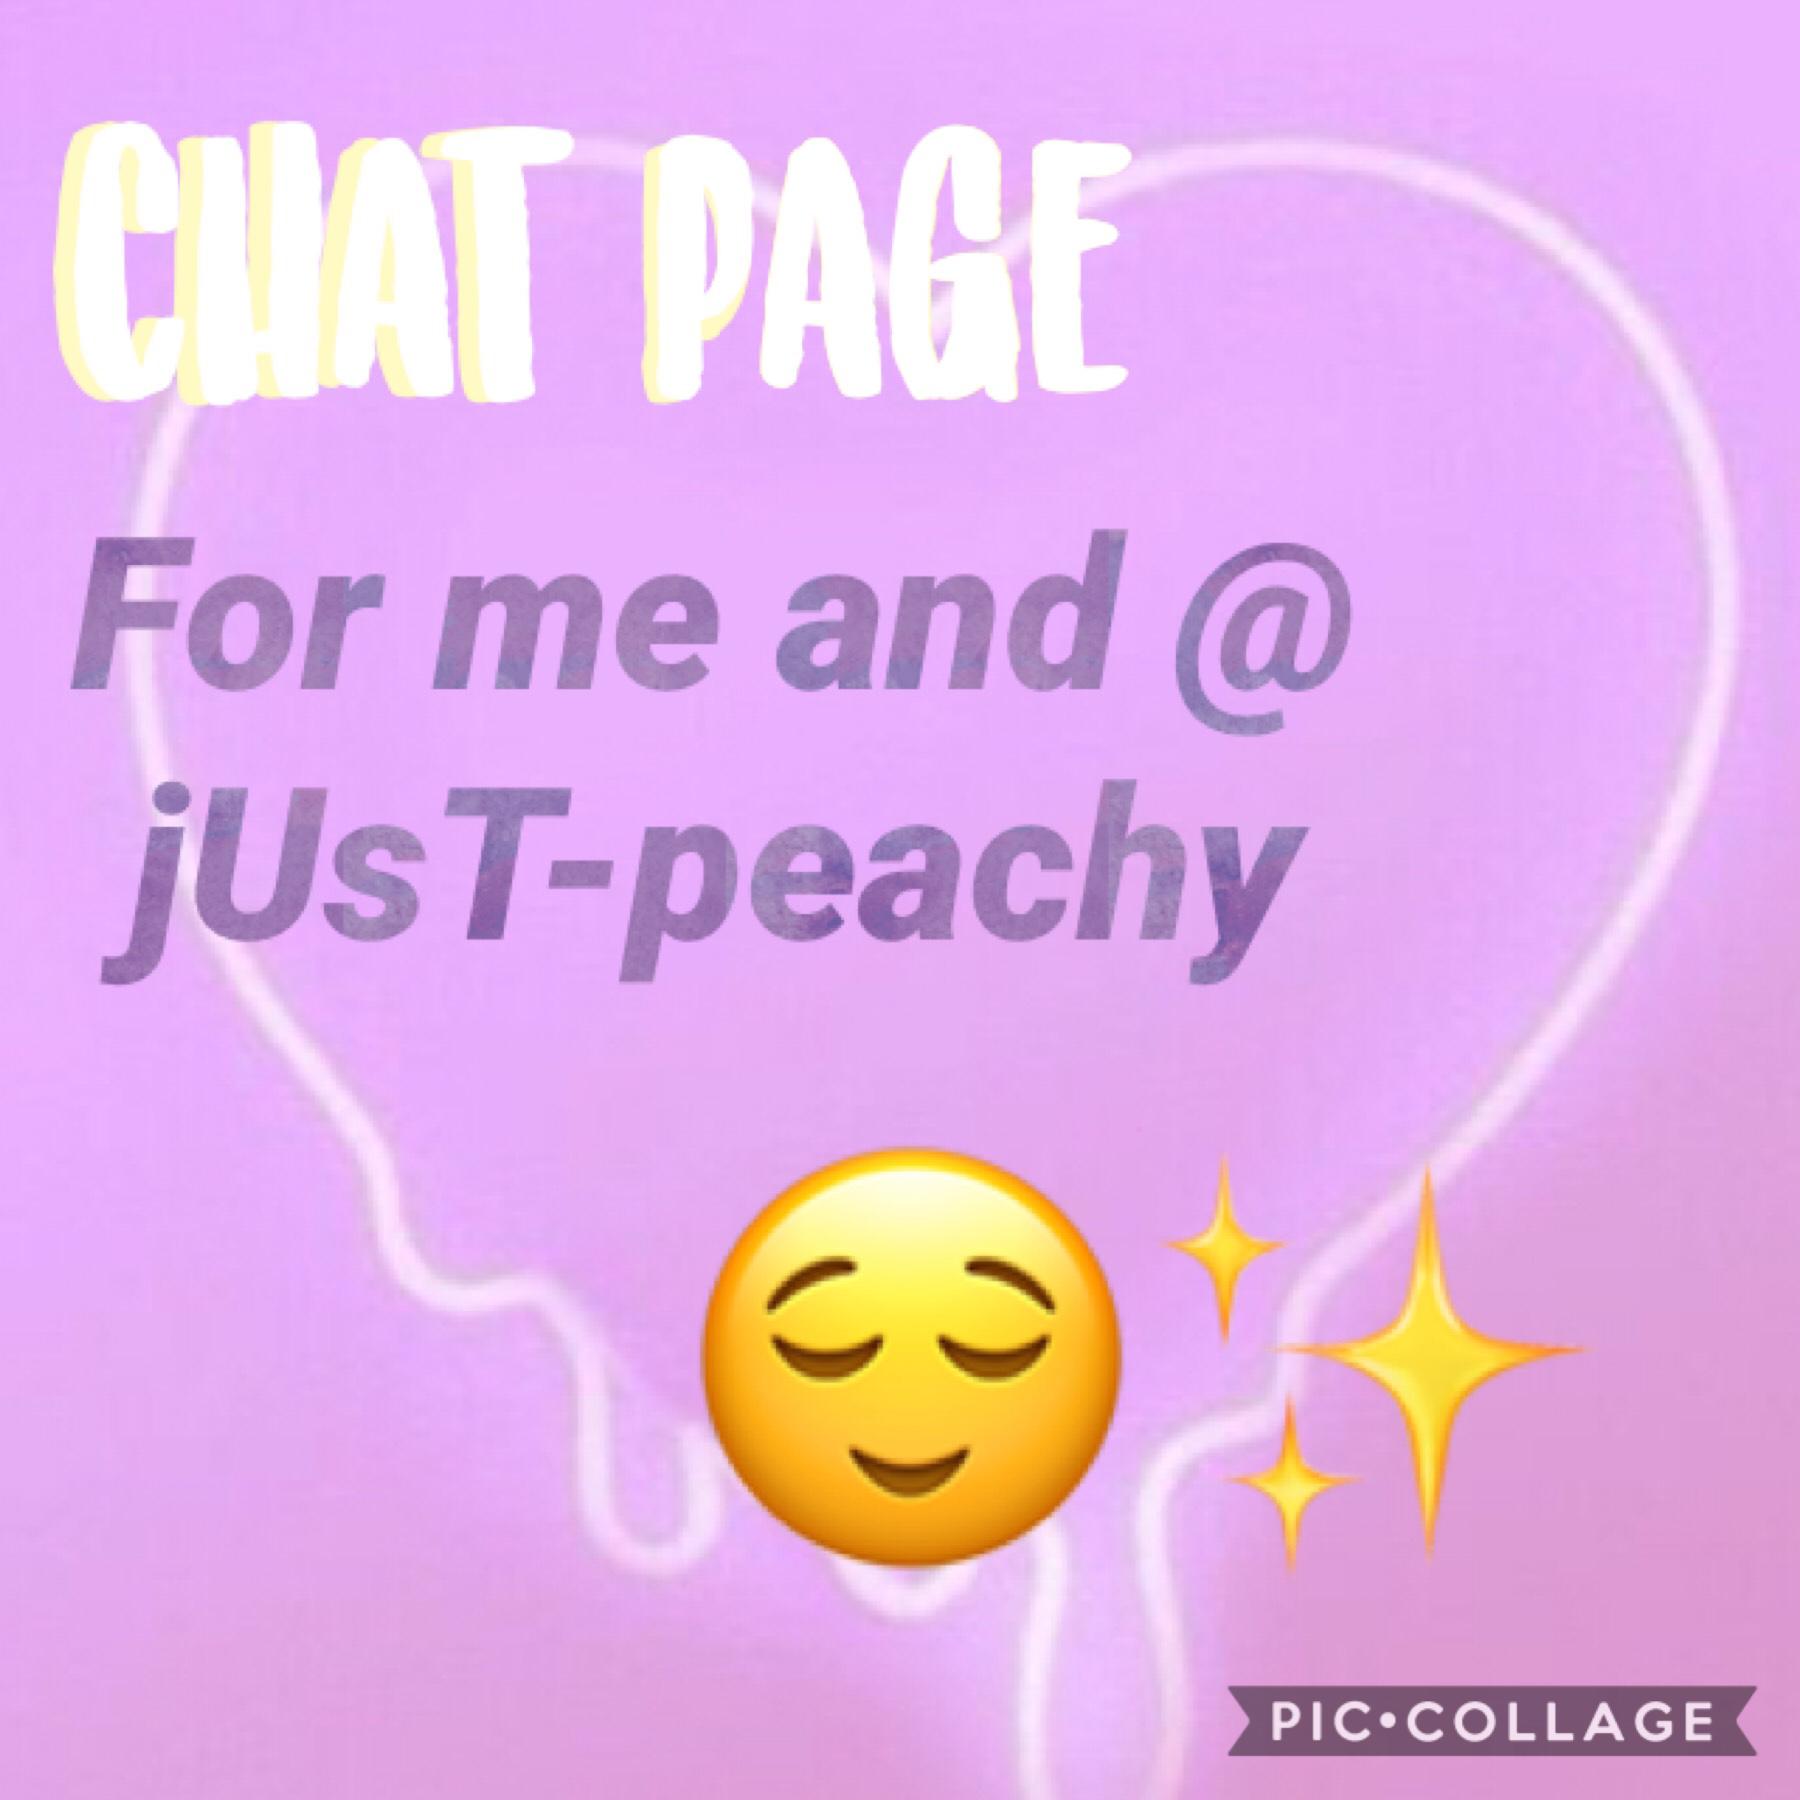 ❣️ cHaT pAgE ❣️